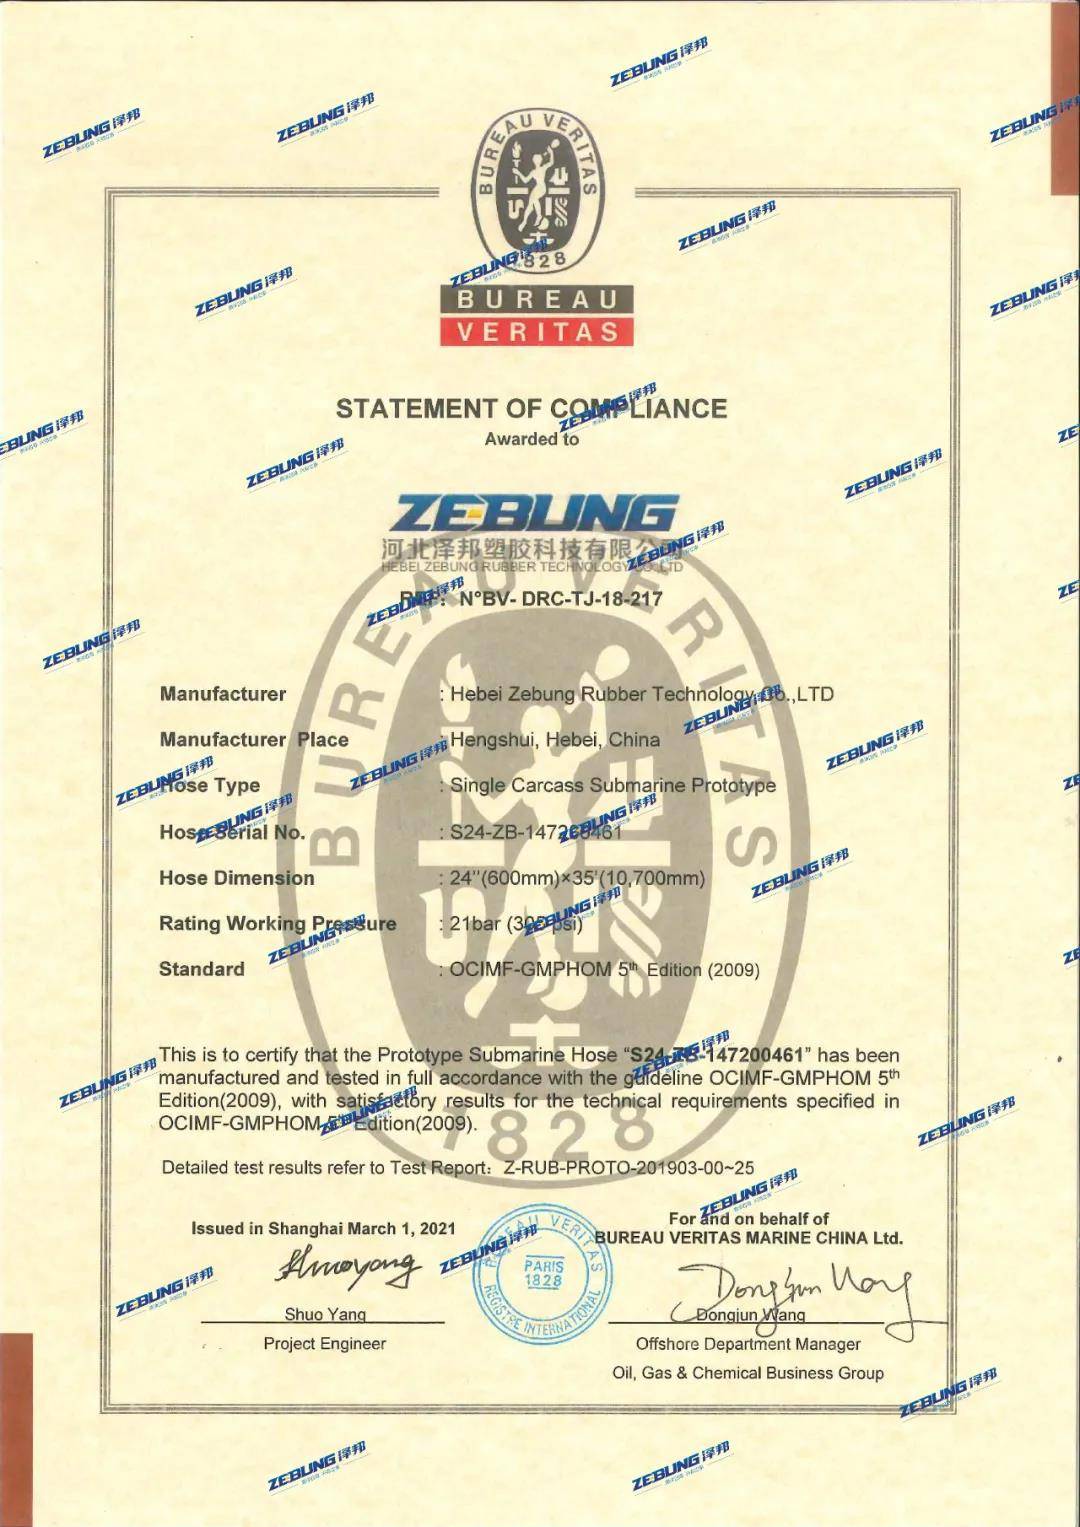 ZEBUNG DN 600mm submarine oil hose and marine floating oil hose have both obtained OCIMF GMPHOM 2009 certificate issued by BV !!!